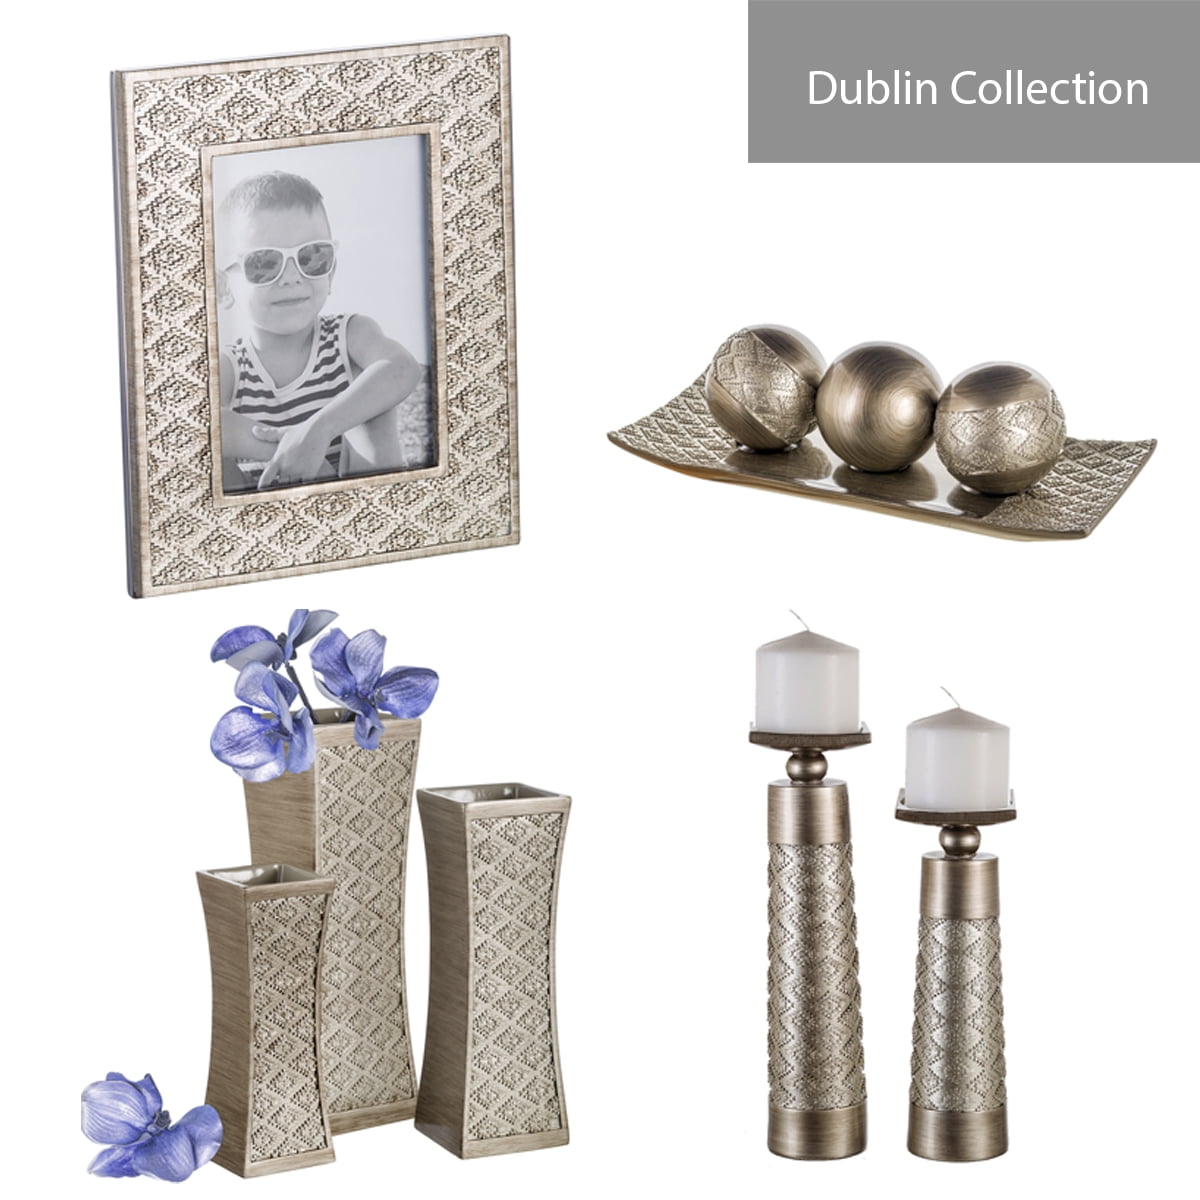 Dublin Decorative Tray and Orbs/Balls Set of 3 Centerpiece Bowl with Balls 